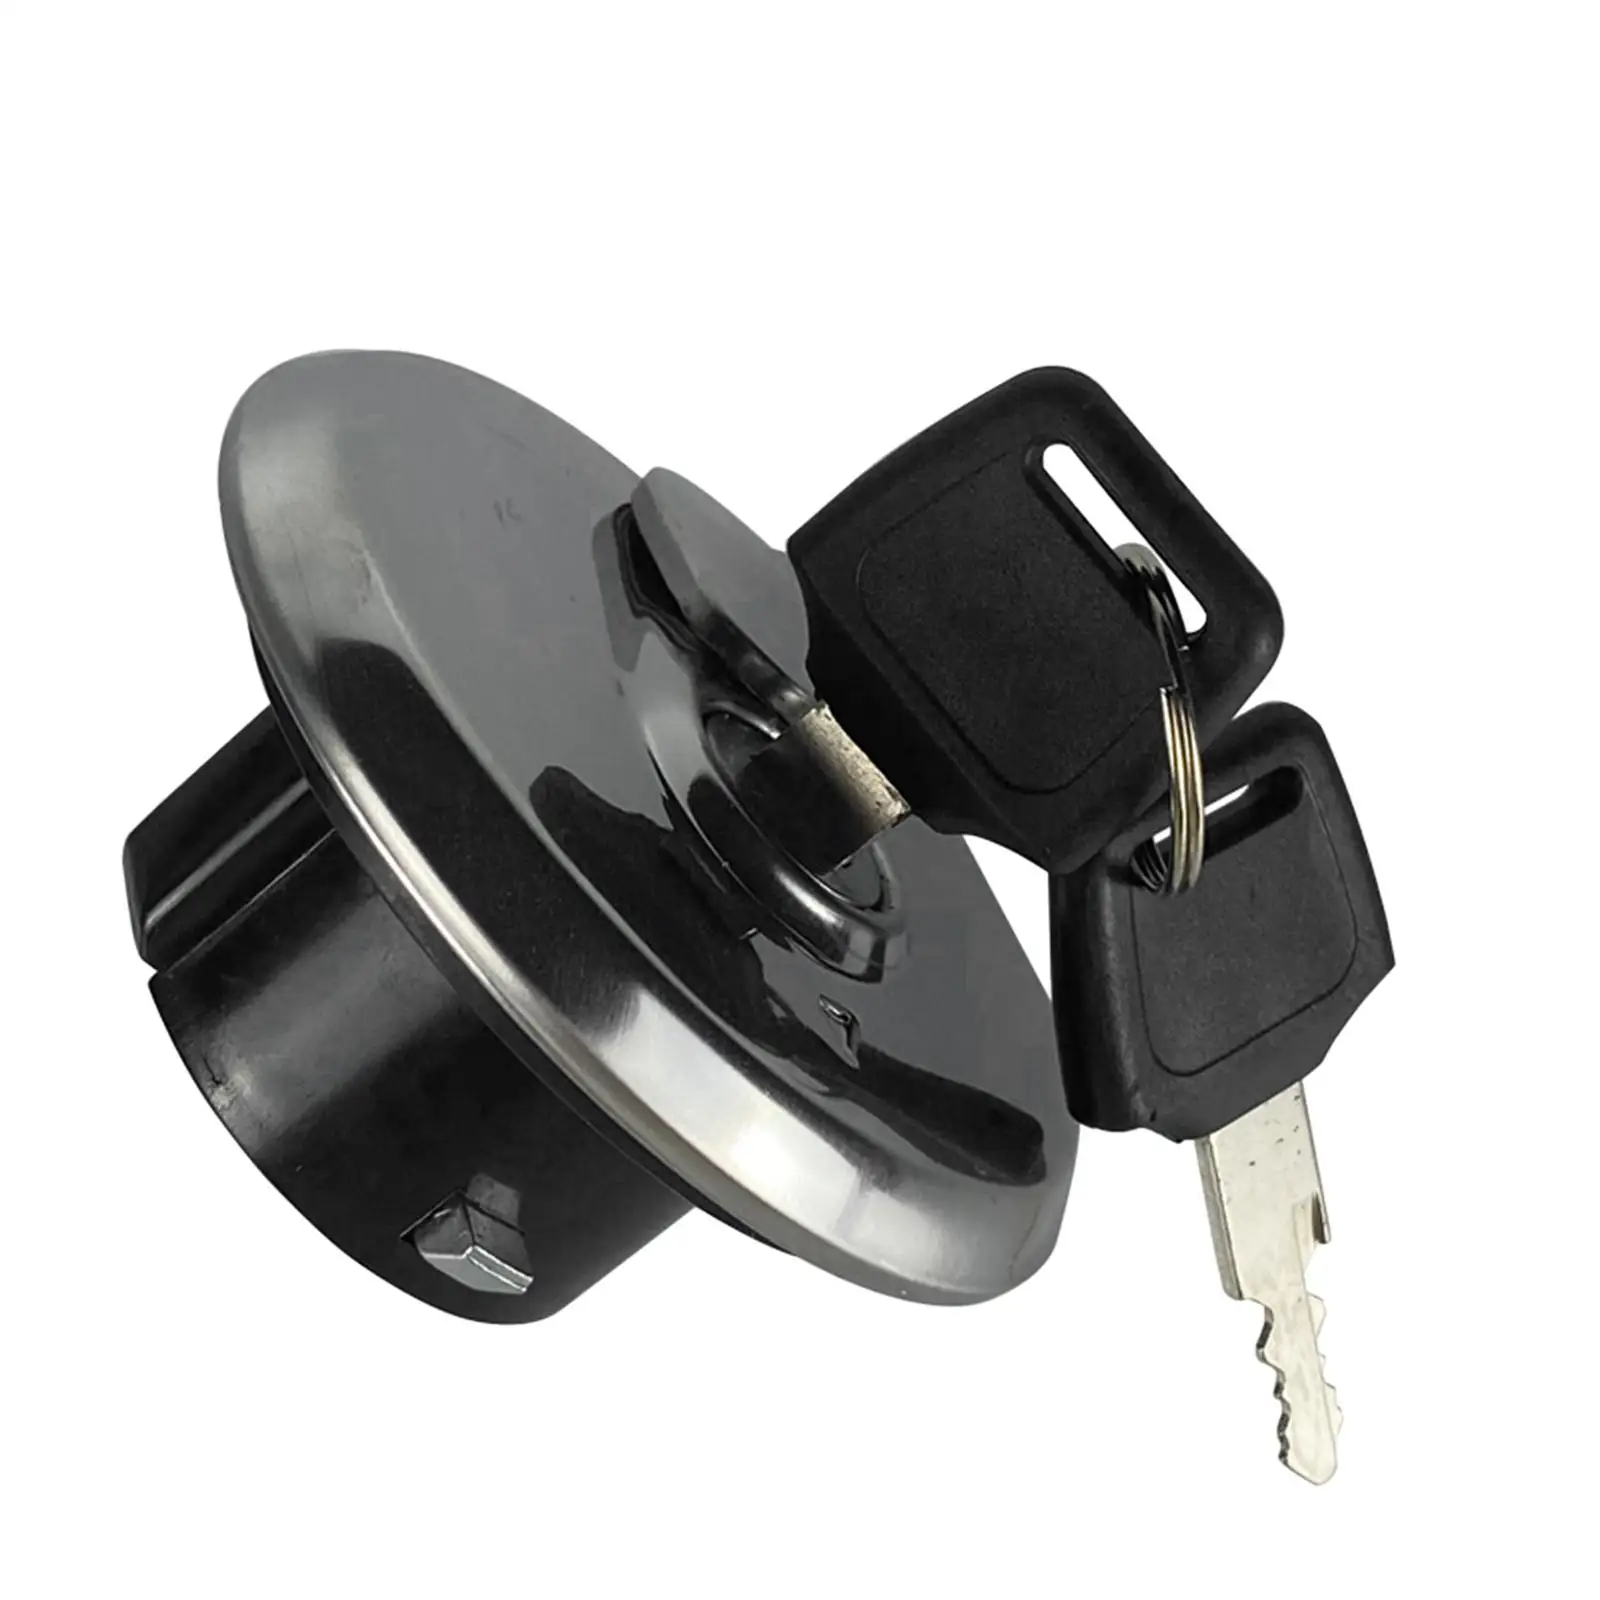 Motorcycle Fuel Gas Tank Cap Cover, with 2 Keys for Suzuki Gn125 Accessories